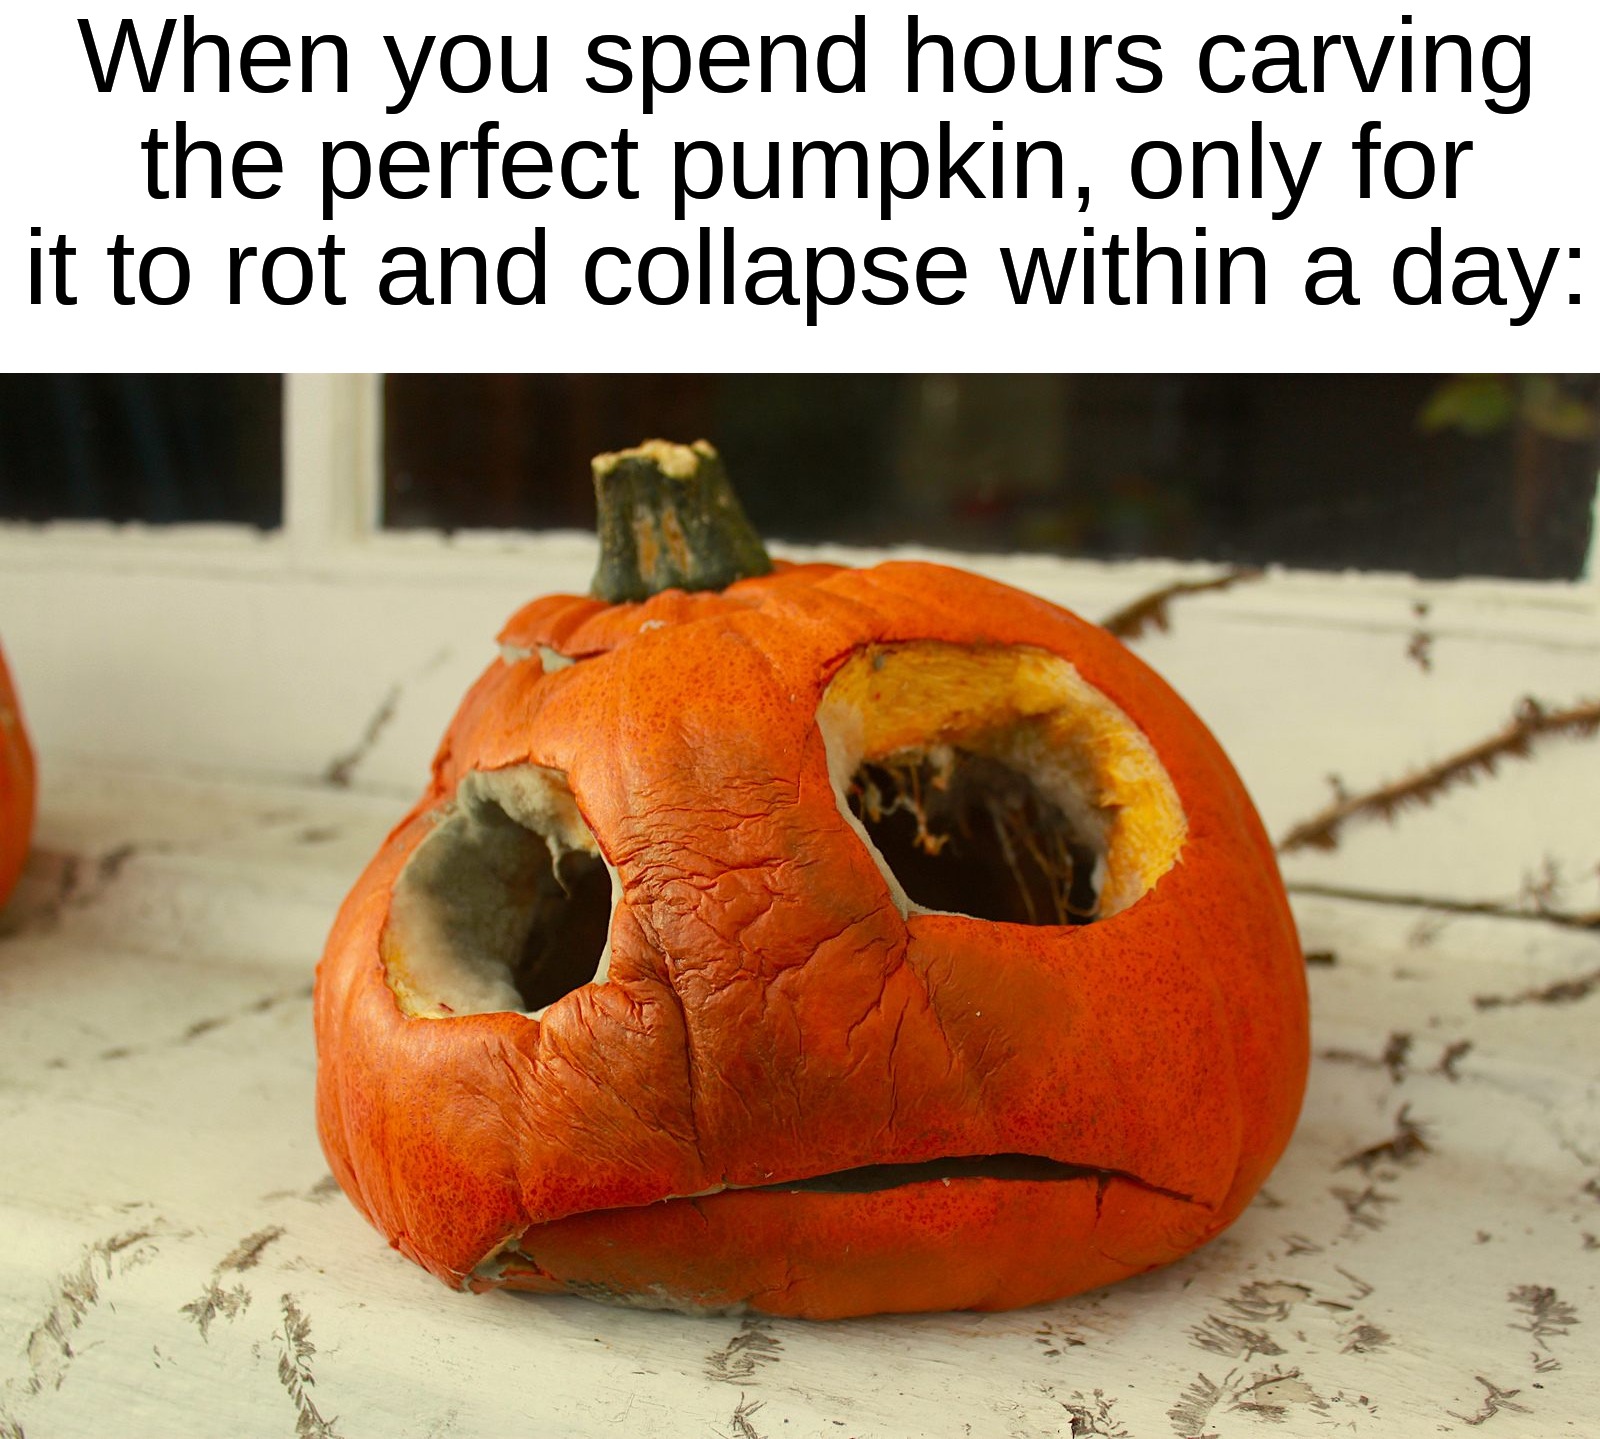 The worst thing that could possibly happen... | When you spend hours carving the perfect pumpkin, only for it to rot and collapse within a day: | image tagged in memes,funny,true story,relatable memes,halloween,spooky month | made w/ Imgflip meme maker